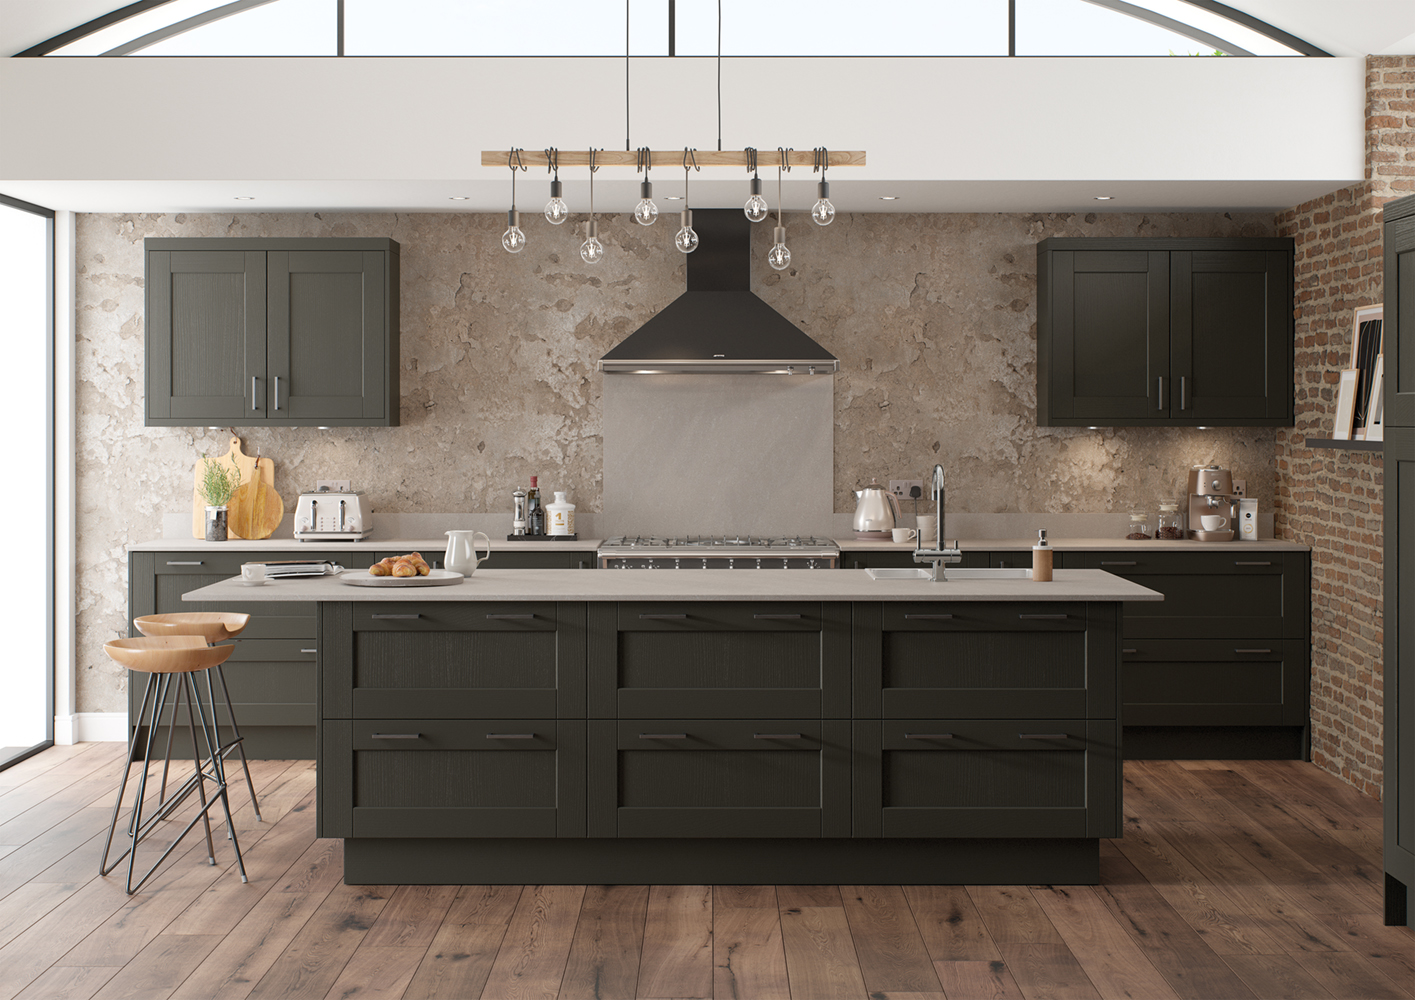 Kendal Graphite Grey V-Groove shaker style kitchen, made by The Kitchen Depot